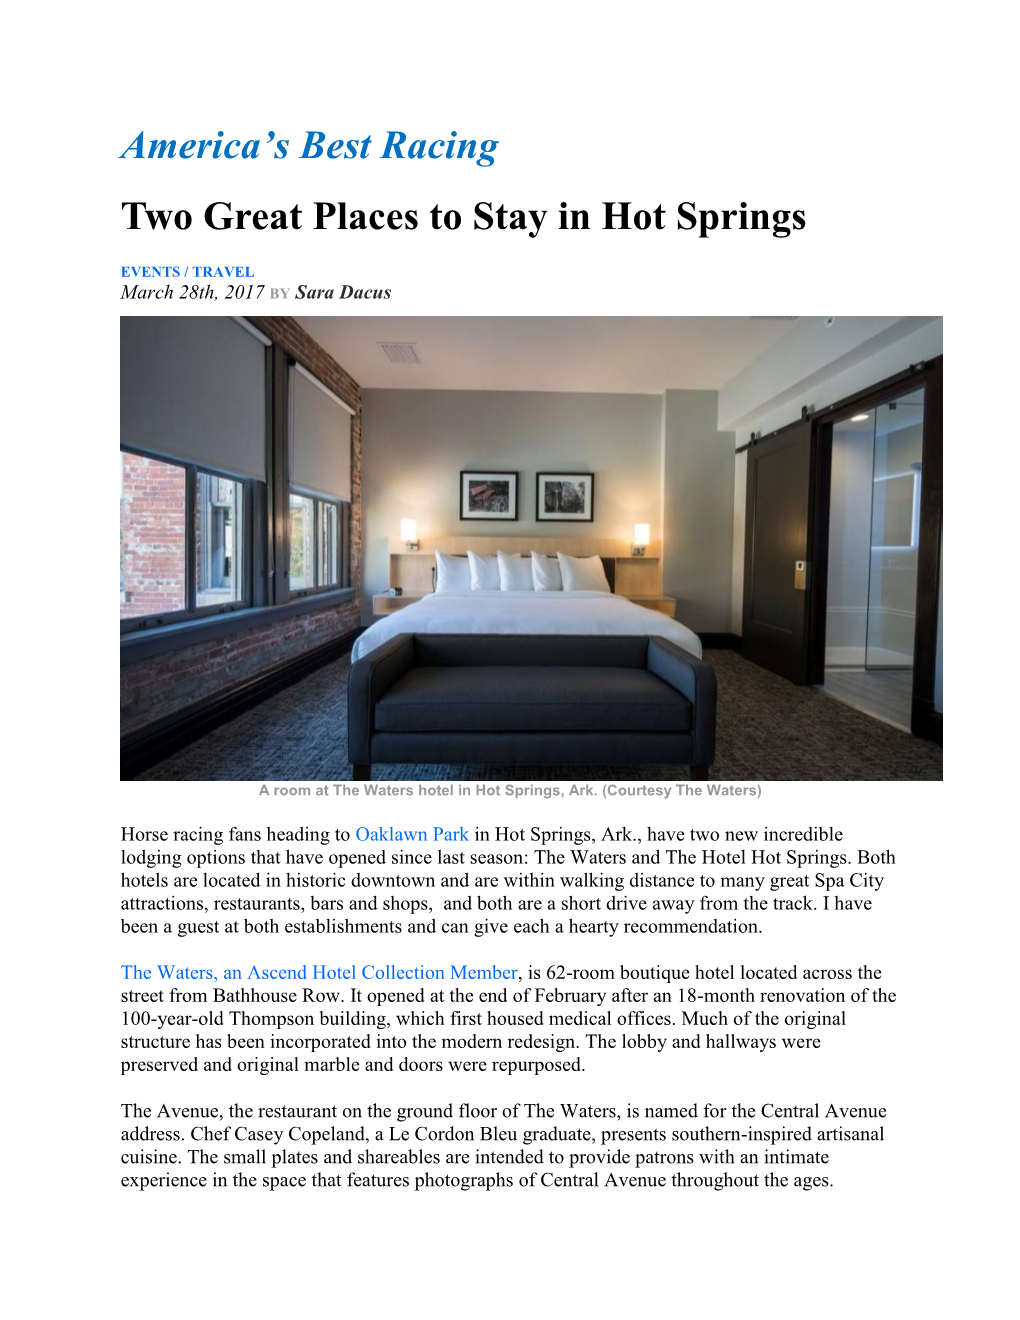 America's Best Racing Two Great Places to Stay in Hot Springs